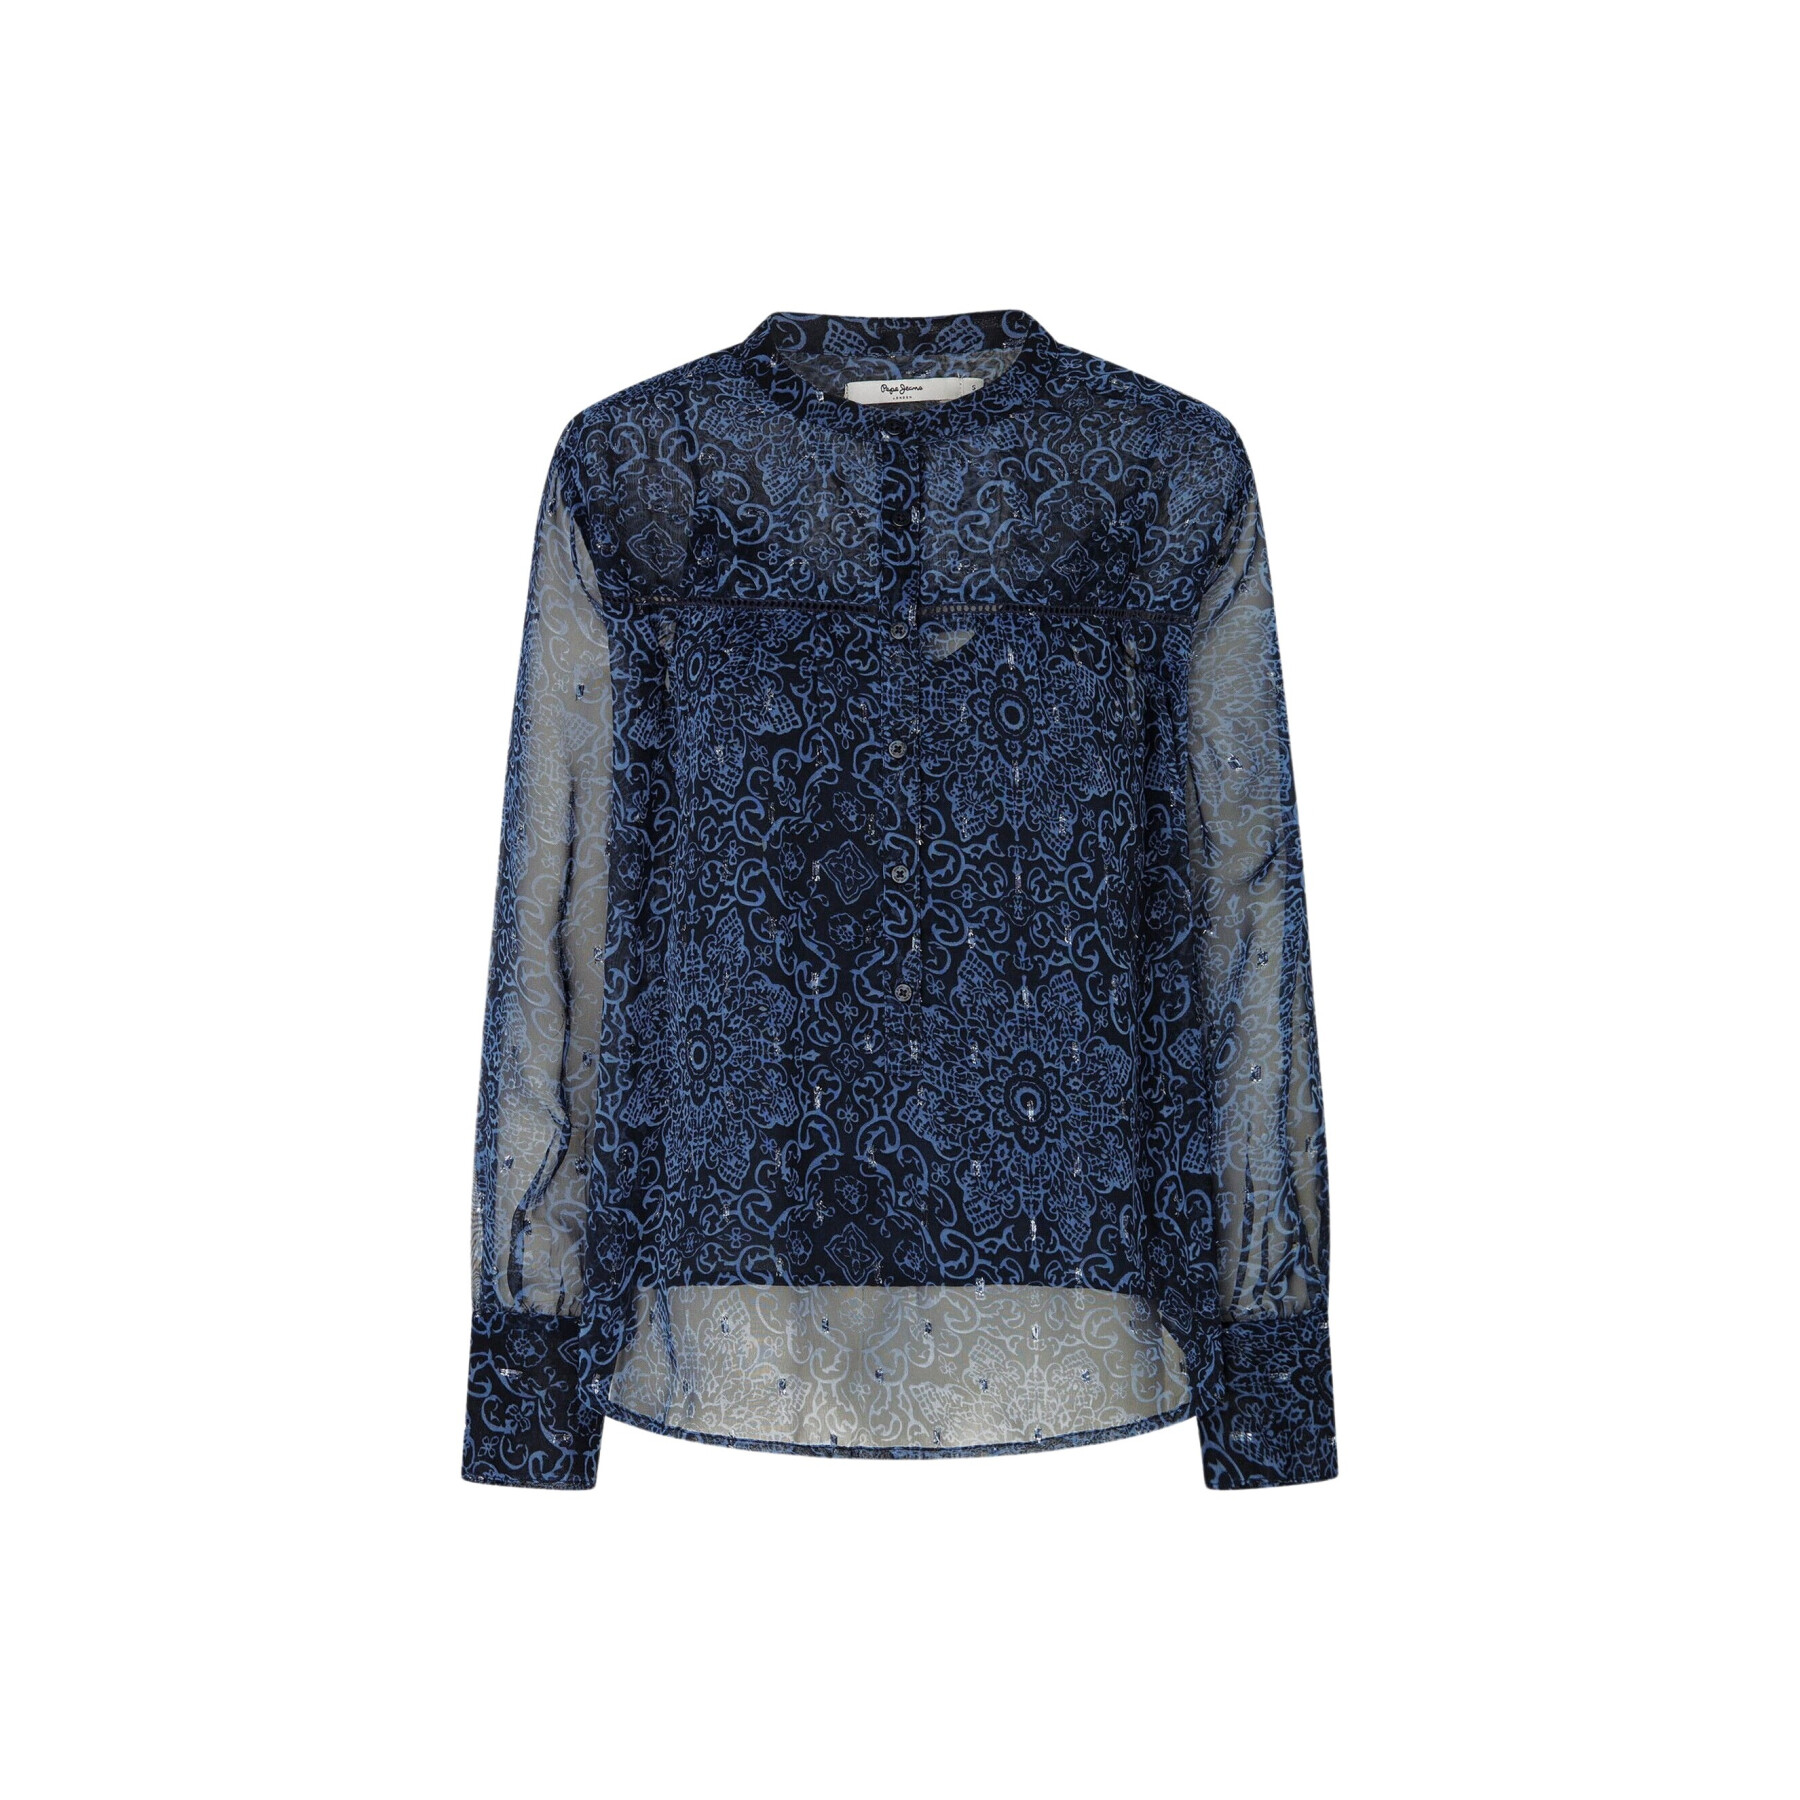 Women's blouse Pepe Jeans Clementine